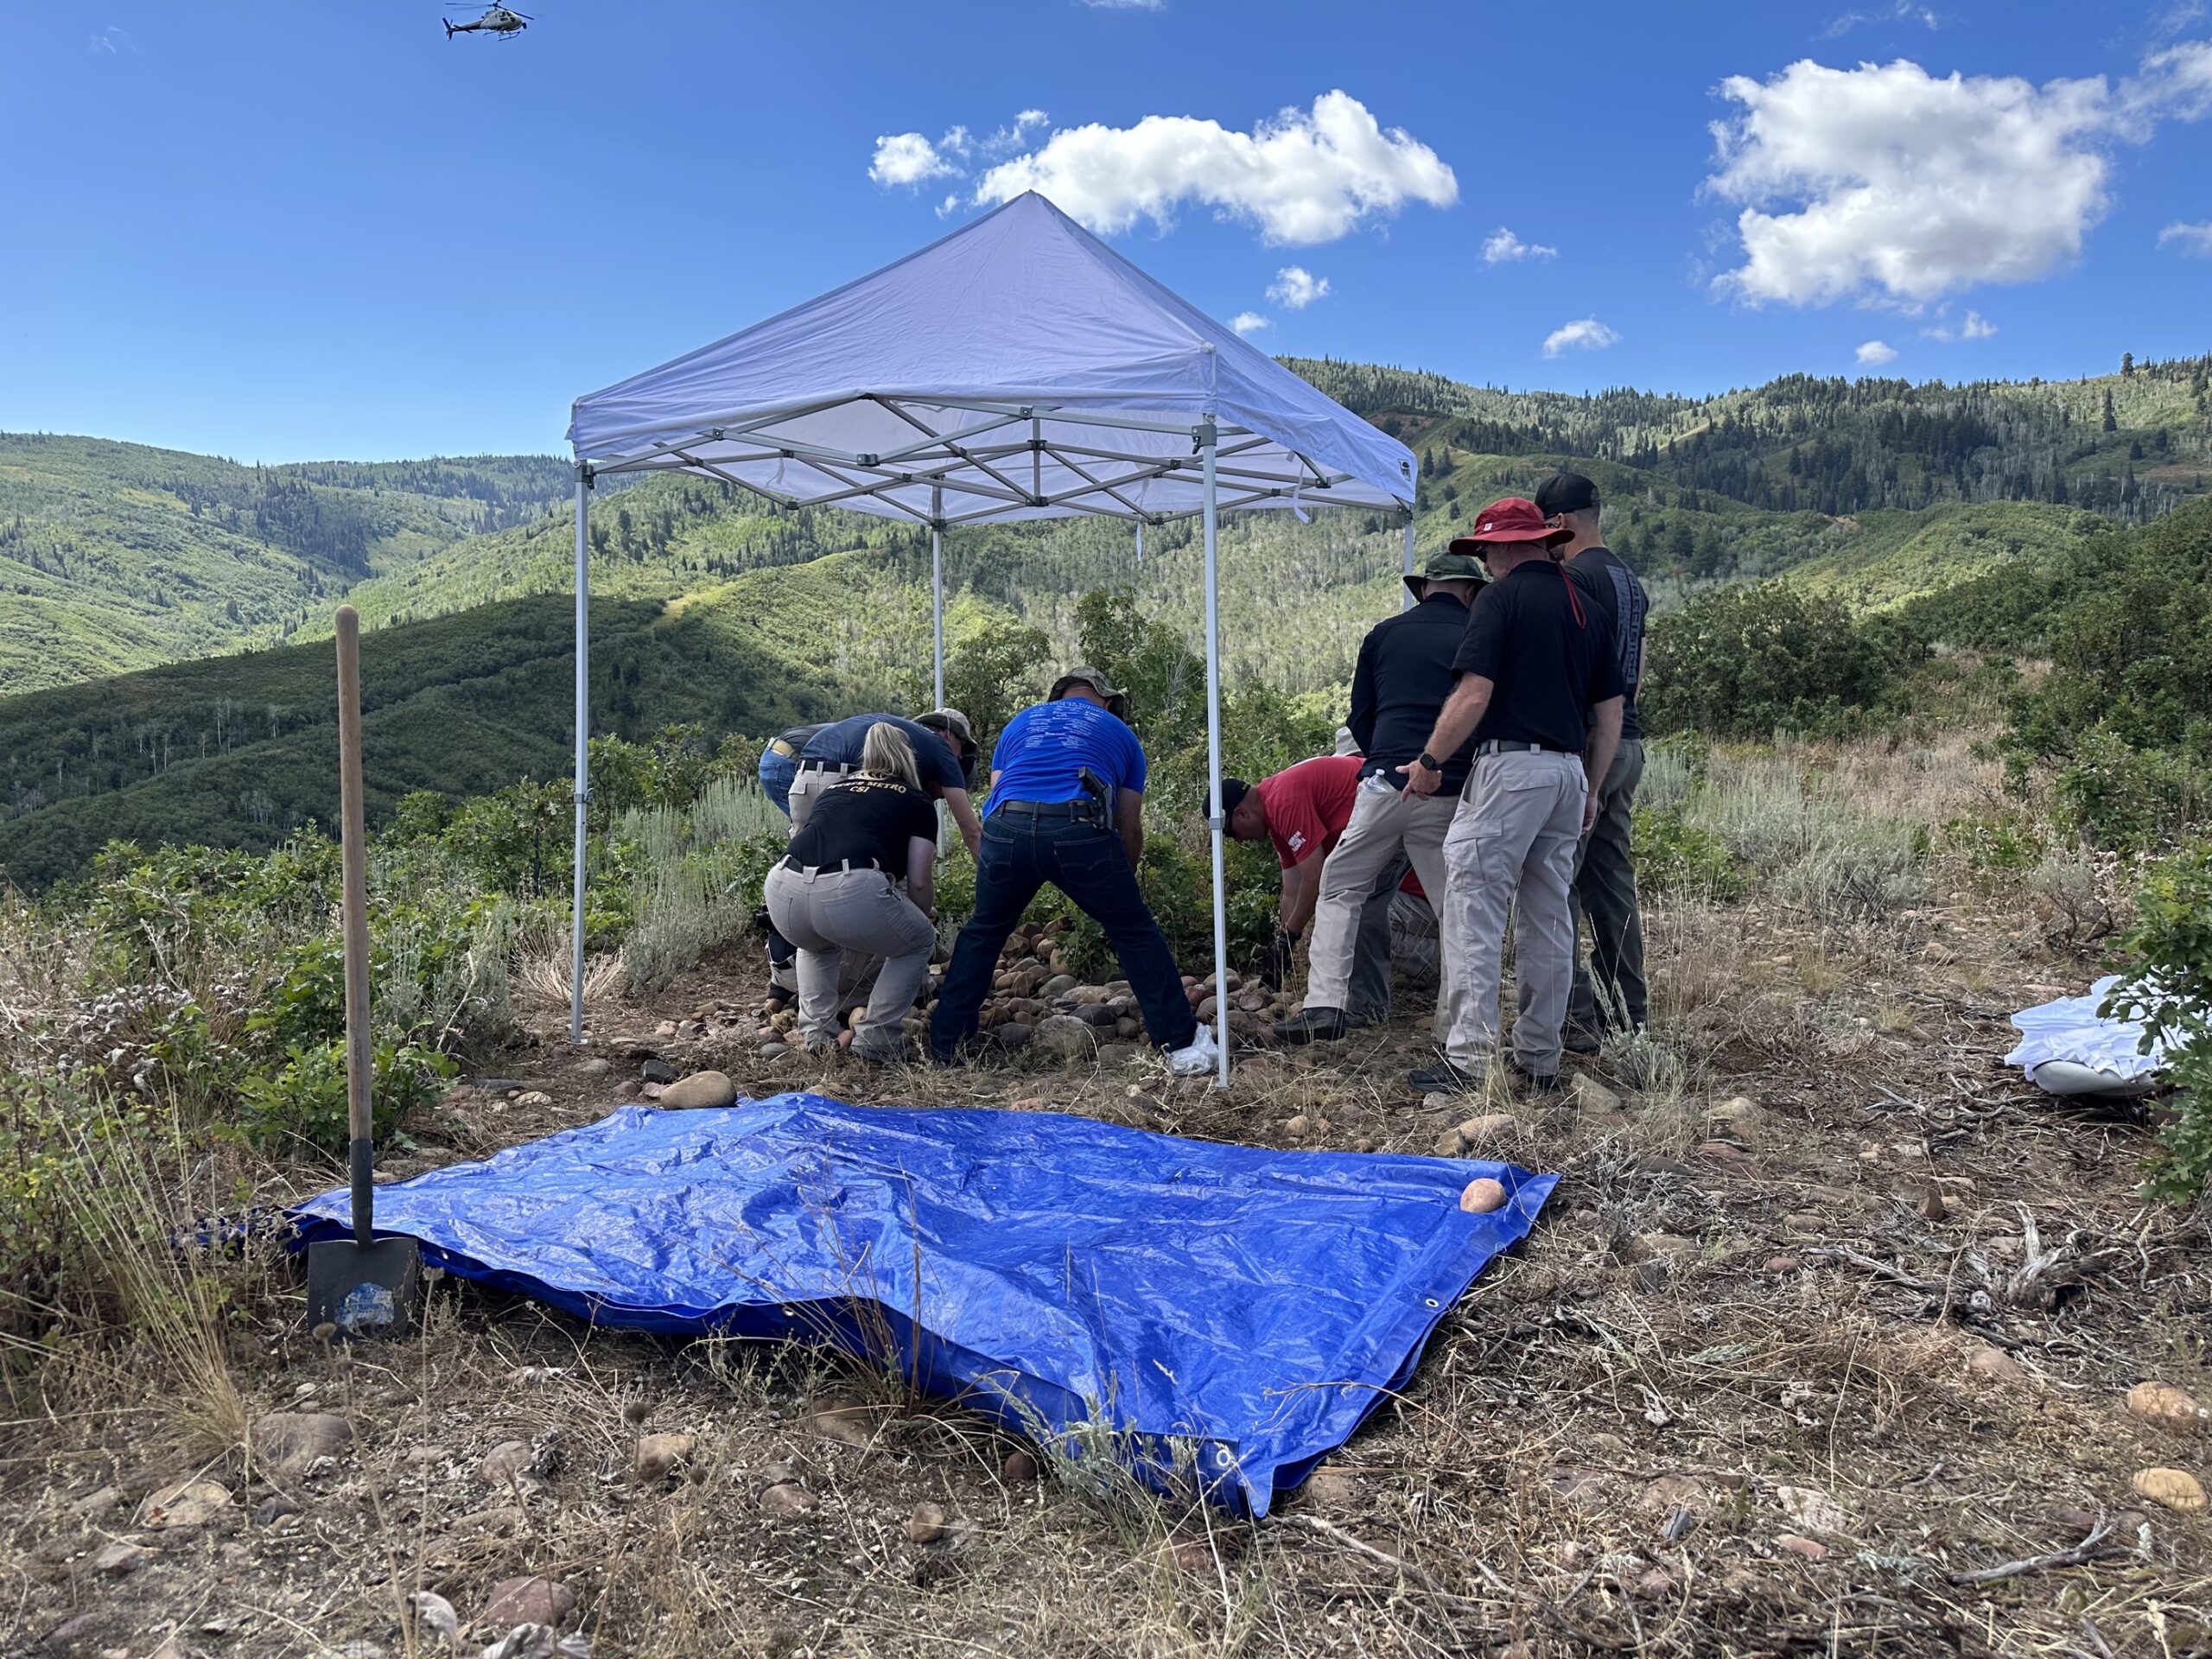 law enforcement gathered around a possible mountain gravesite in brush on a mountain top...